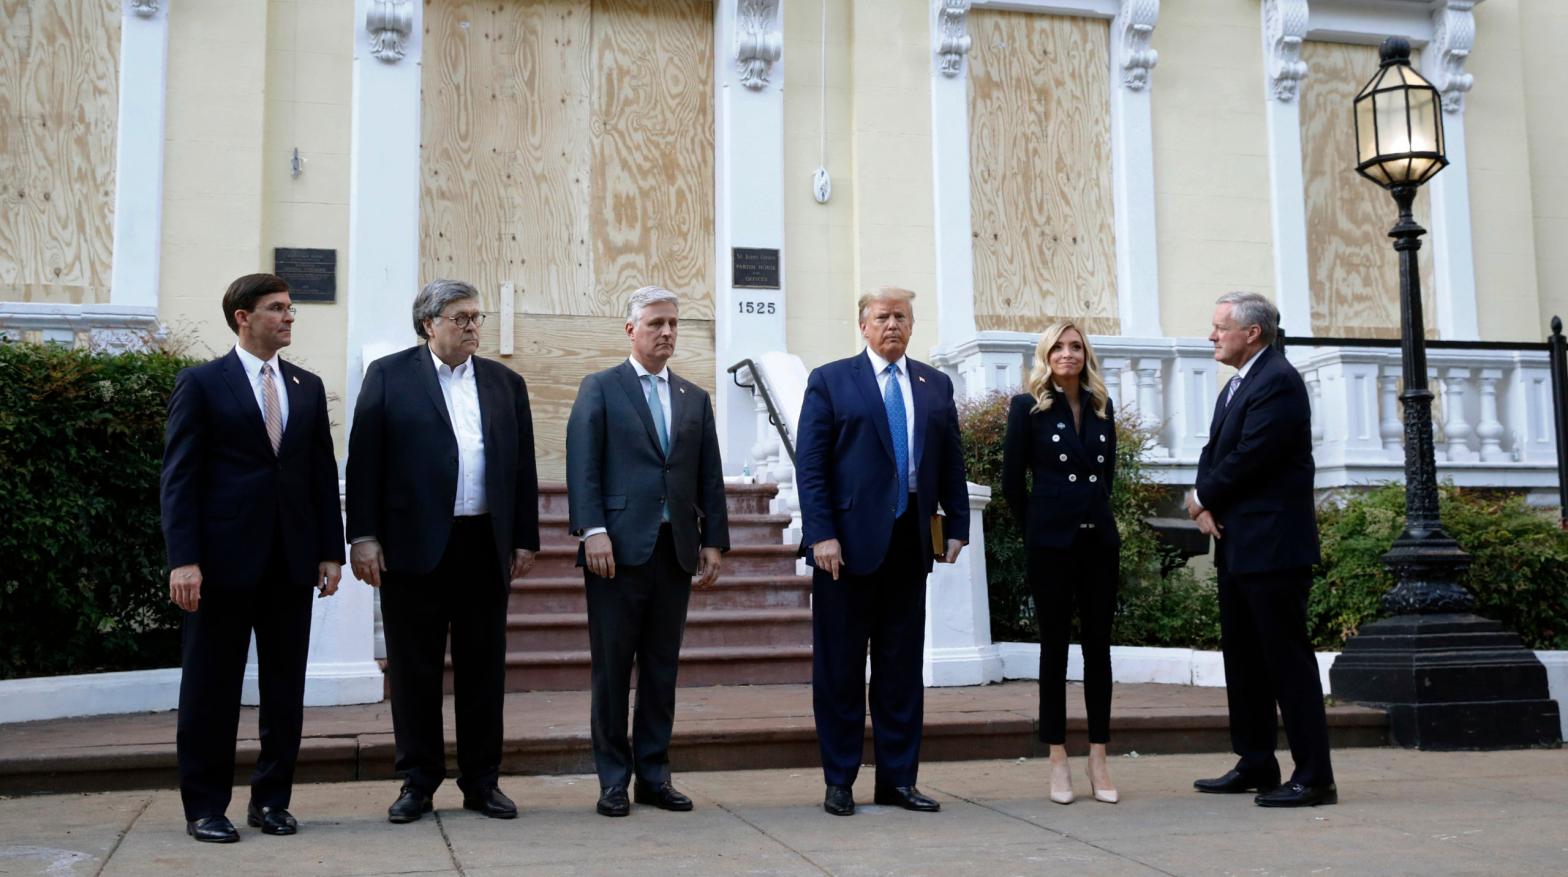 From left: Defence Secretary Mark Esper, Attorney General William Barr, White House national security adviser Robert O'Brien, President Donald Trump, White House press secretary Kayleigh McEnany, and White House chief of staff Mark Meadows, on June 1, 2020 (Photo: AP)